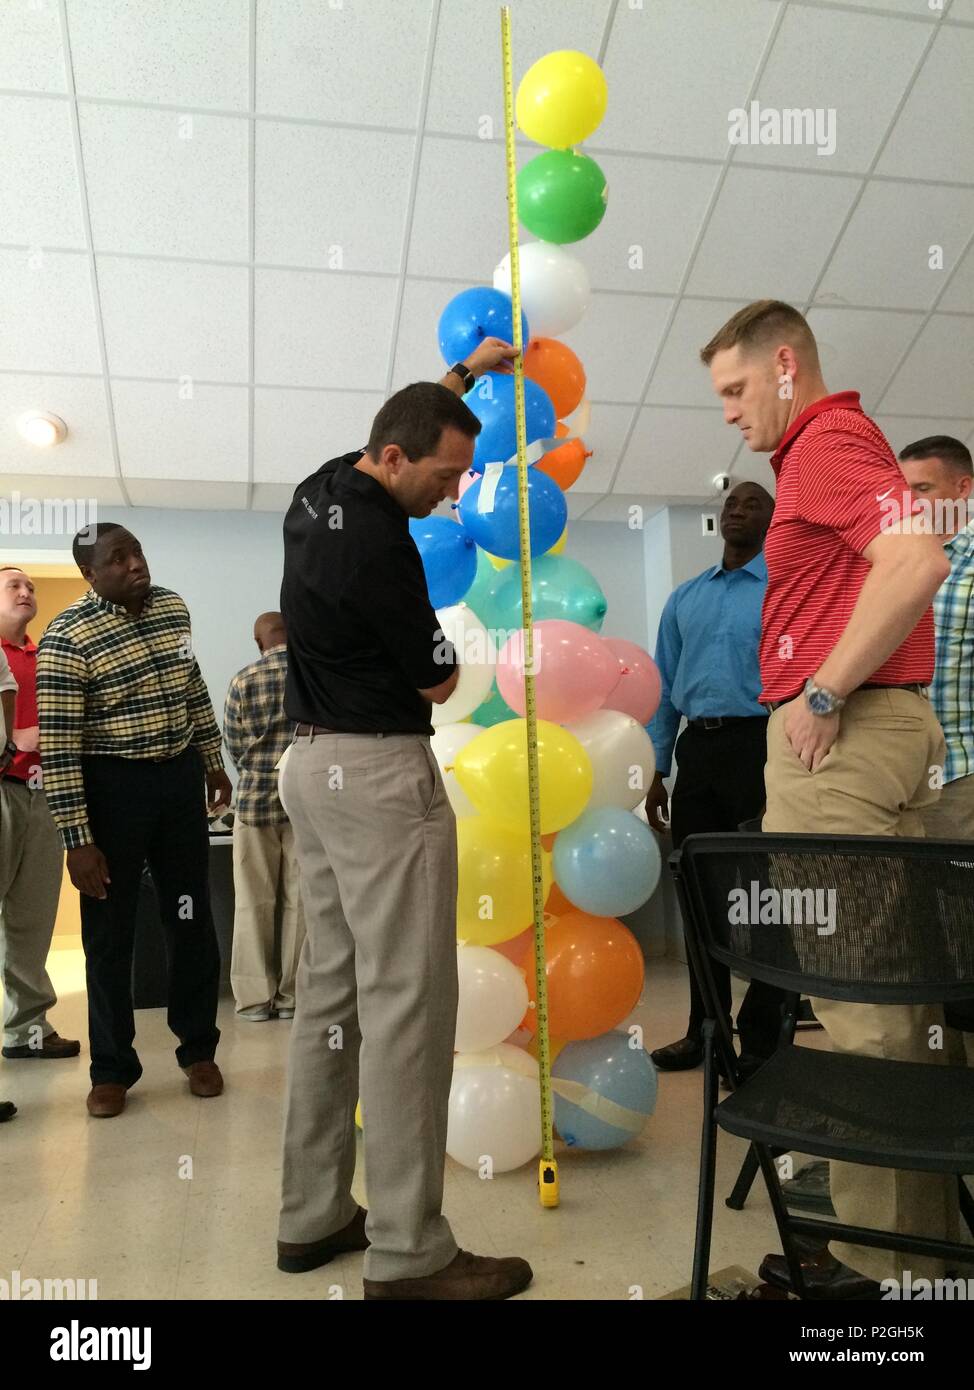 Justin Foster (center), a lead Master Resilience Trainer performance expert with Fort Campbell’s Comprehensive Soldier and Family Fitness program, measures the balloon tower of a team from 101st Airborne Division Sustainment Brigade, 101st Abn. Div. (Air Assault), during a Great Teams event Sept. 16, 2016, on Fort Campbell, Kentucky. (U.S. Army photo by Staff Sgt. Kimberly Lessmeister/101st Airborne Division Sustainment Brigade Public Affairs) Stock Photo